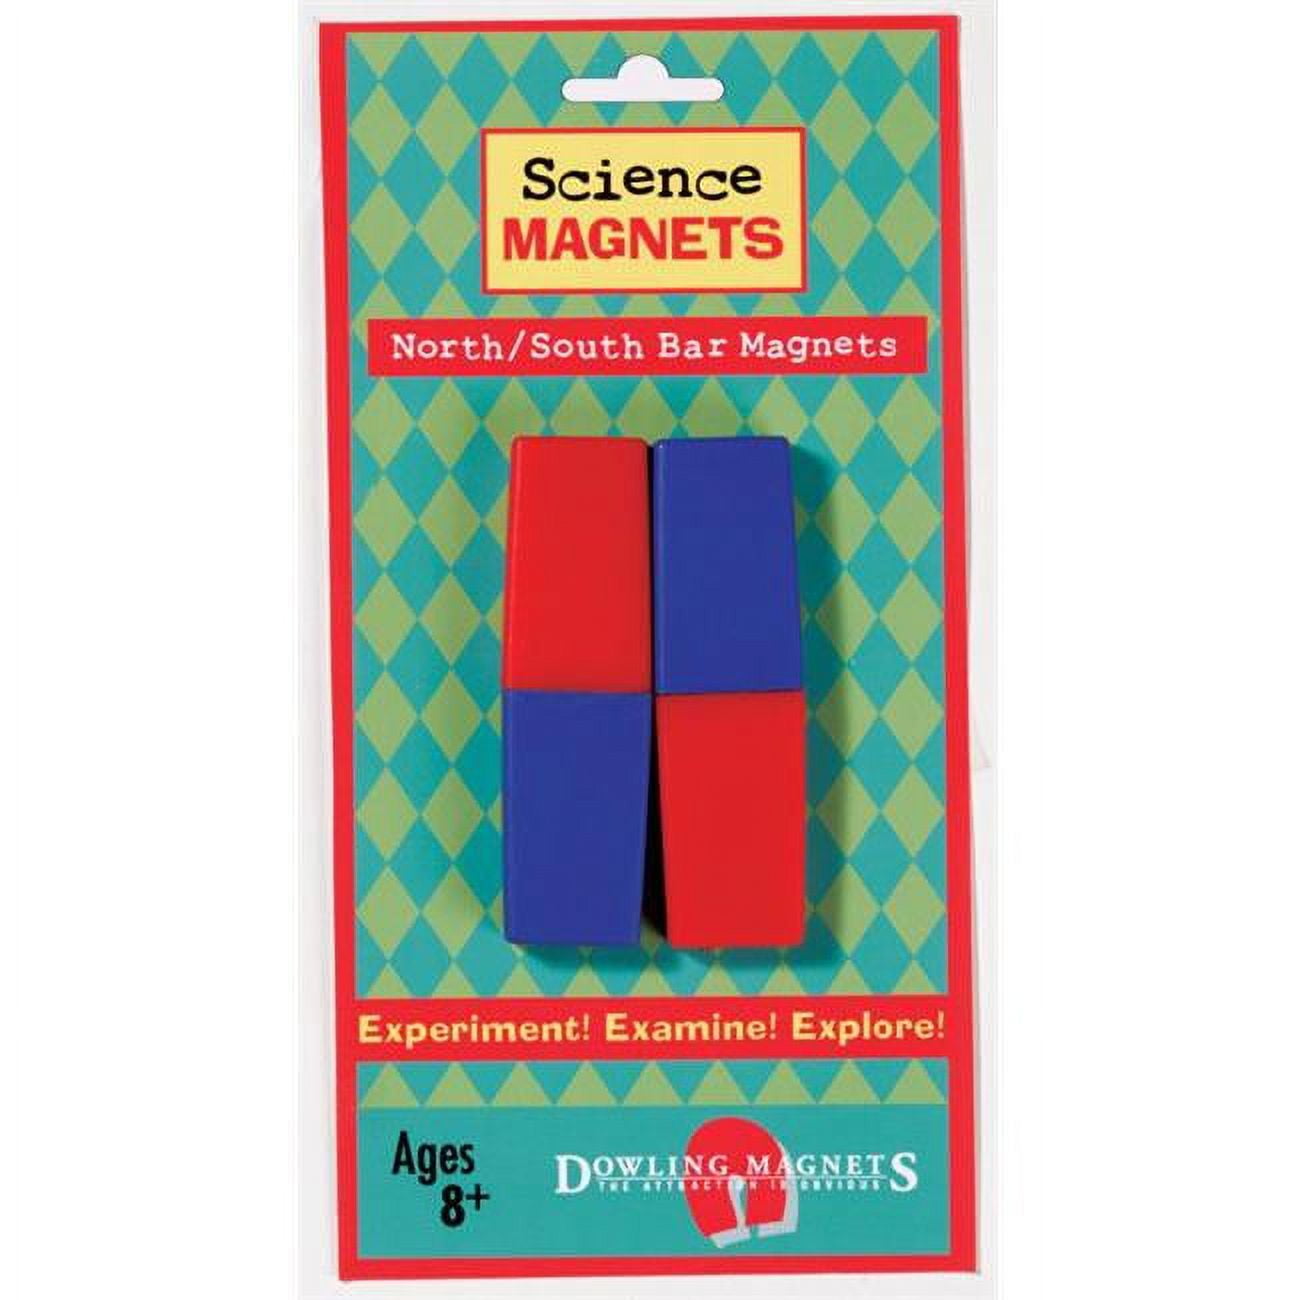 Dowling Magnets Magnet Dots, 3/4, White, 100 Dots Per Pack, Set Of 6 Packs